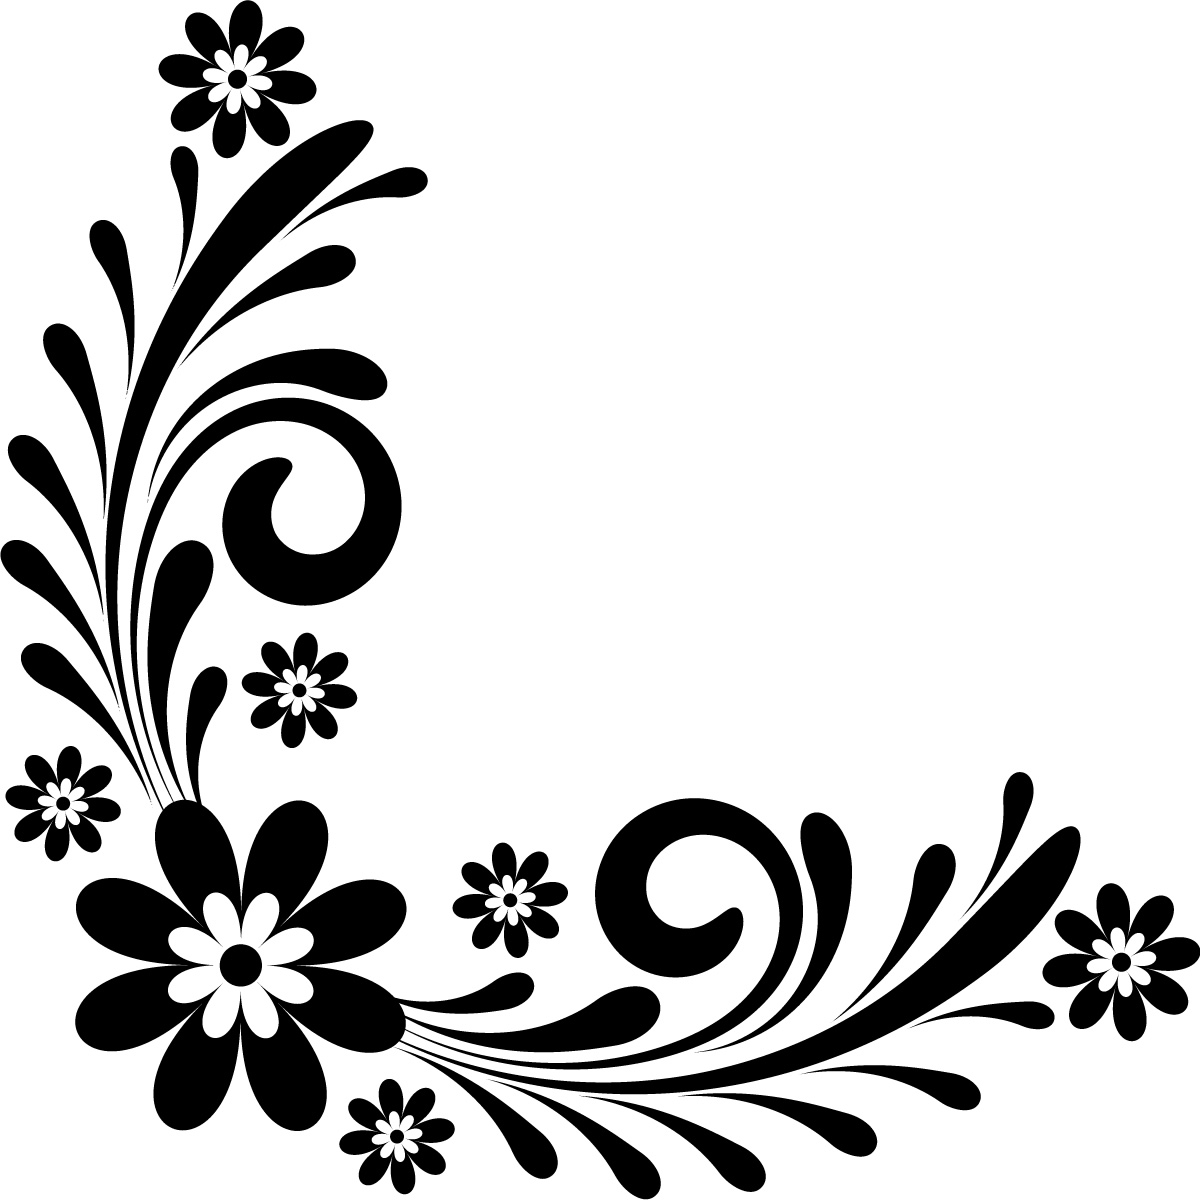 Free Page Border Designs Flowers Black And White Download Free Clip Art Free Clip Art On Clipart Library,Minimalist Small Studio Apartment Design Ideas